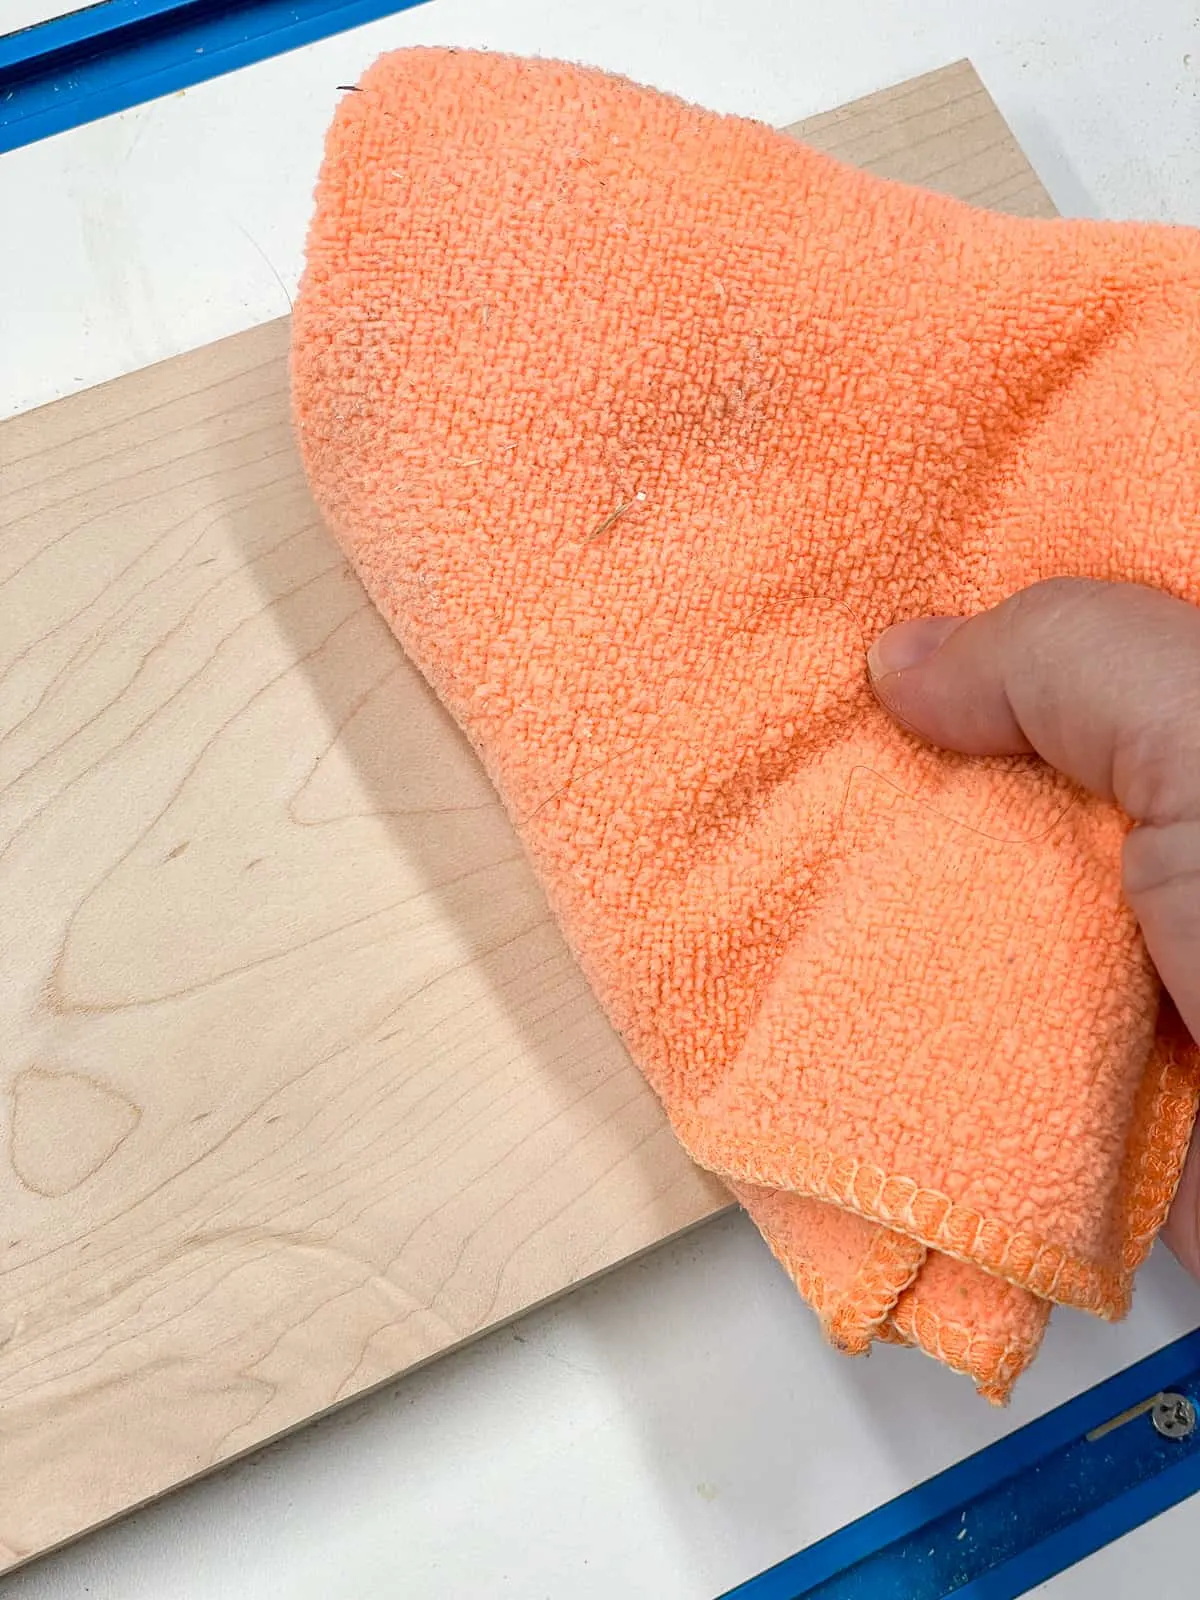 dust collected on microfiber cloth after rubbing it over a wood board